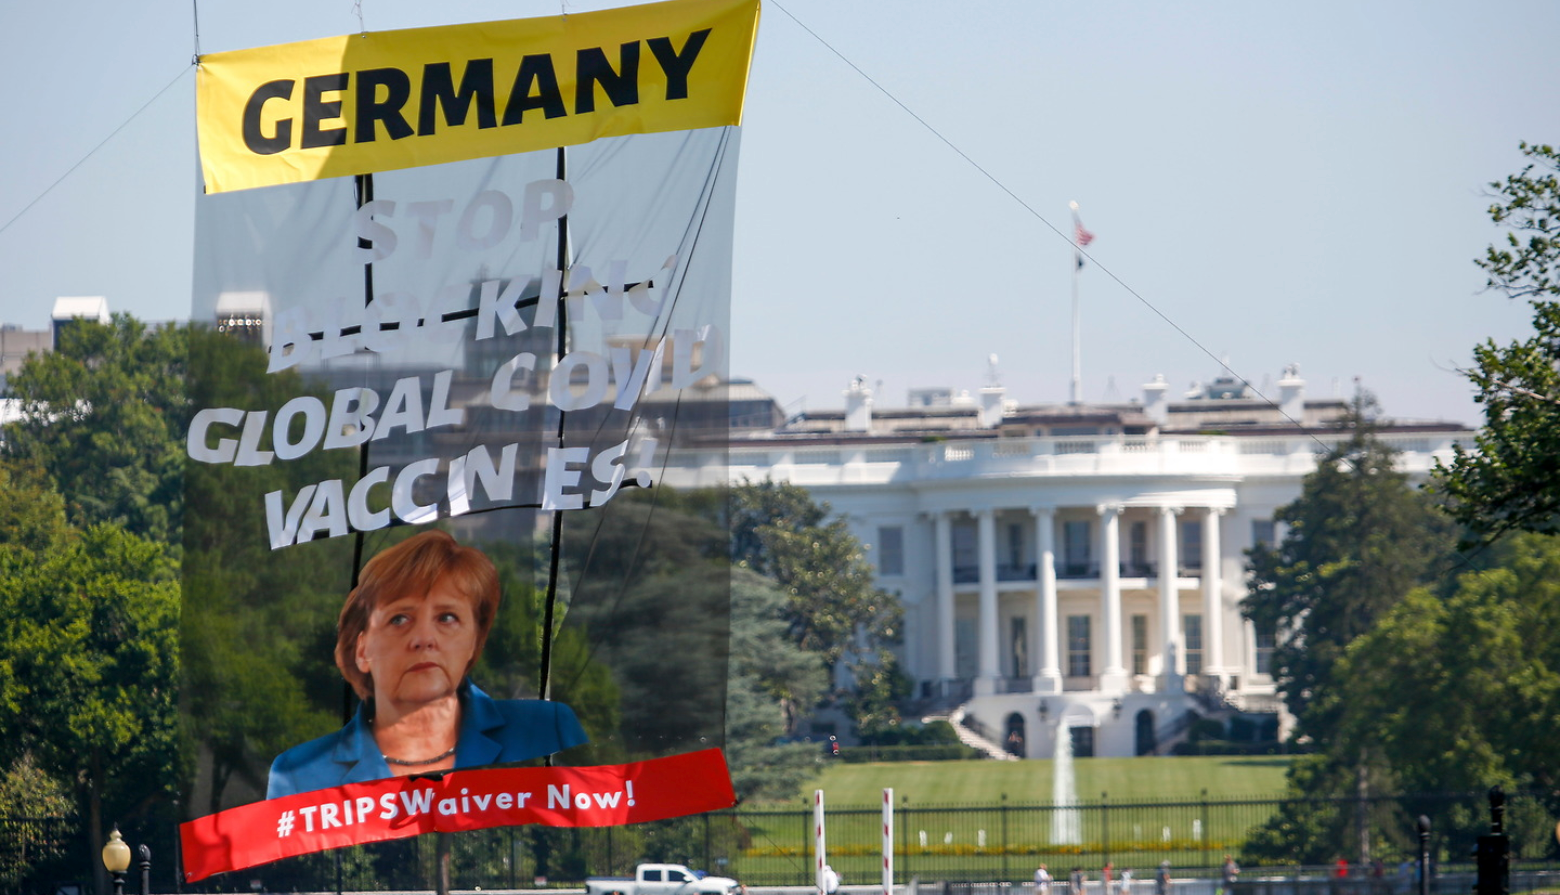 Protesters hoisted a large banner outside the White House calling on German Chancellor Angela Merkel to stop blocking an emergency waiver of intellectual property rules.